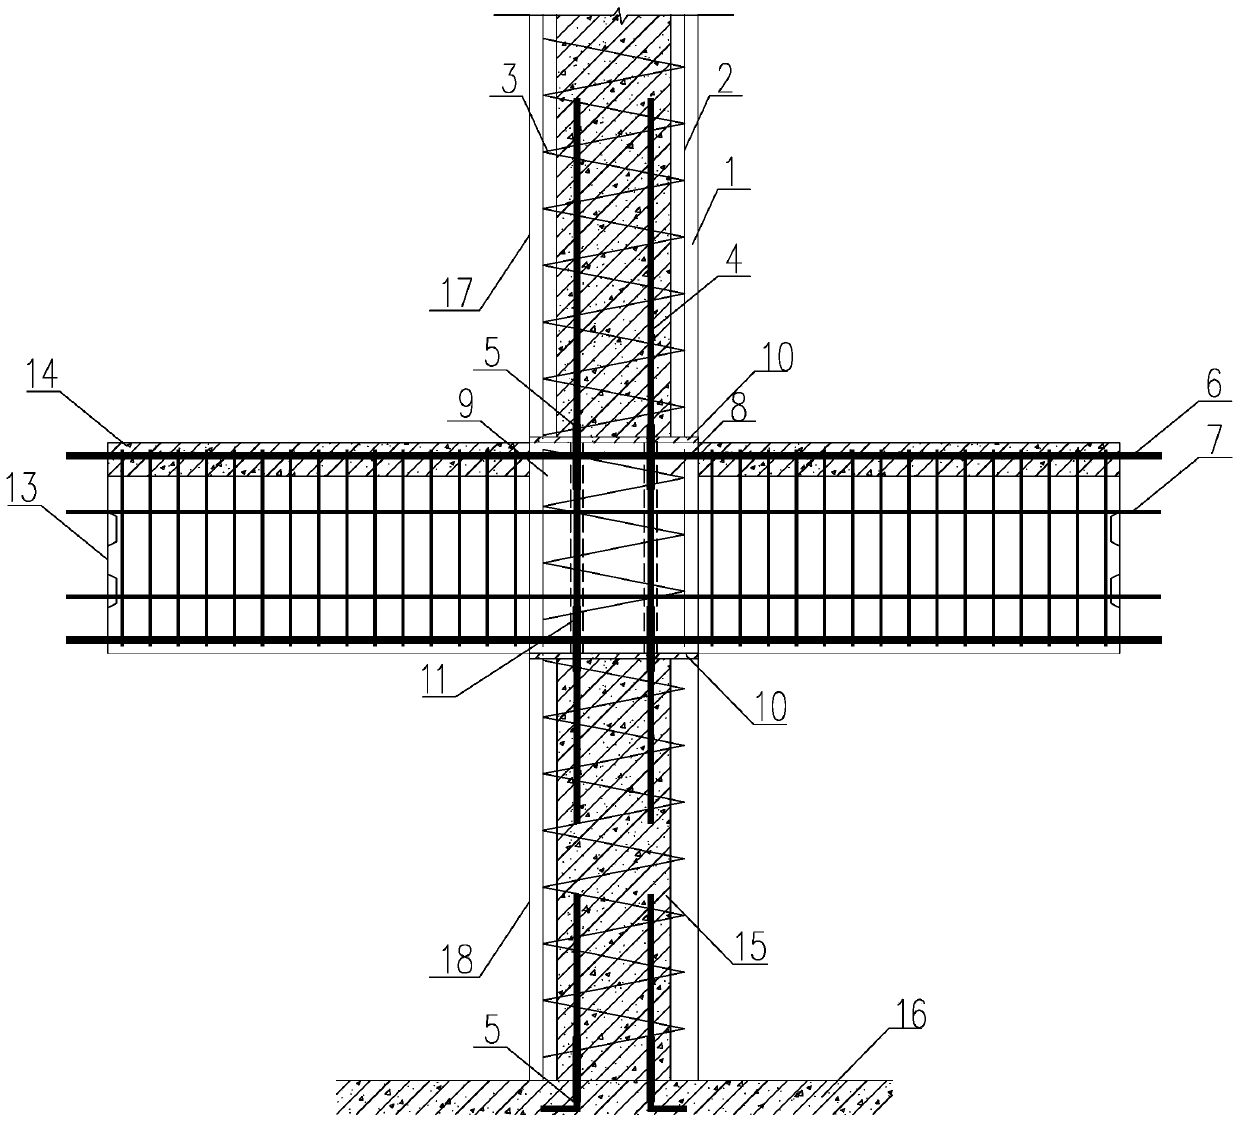 Prefabricated column of assembly type concrete building structure and beam and column joint with same